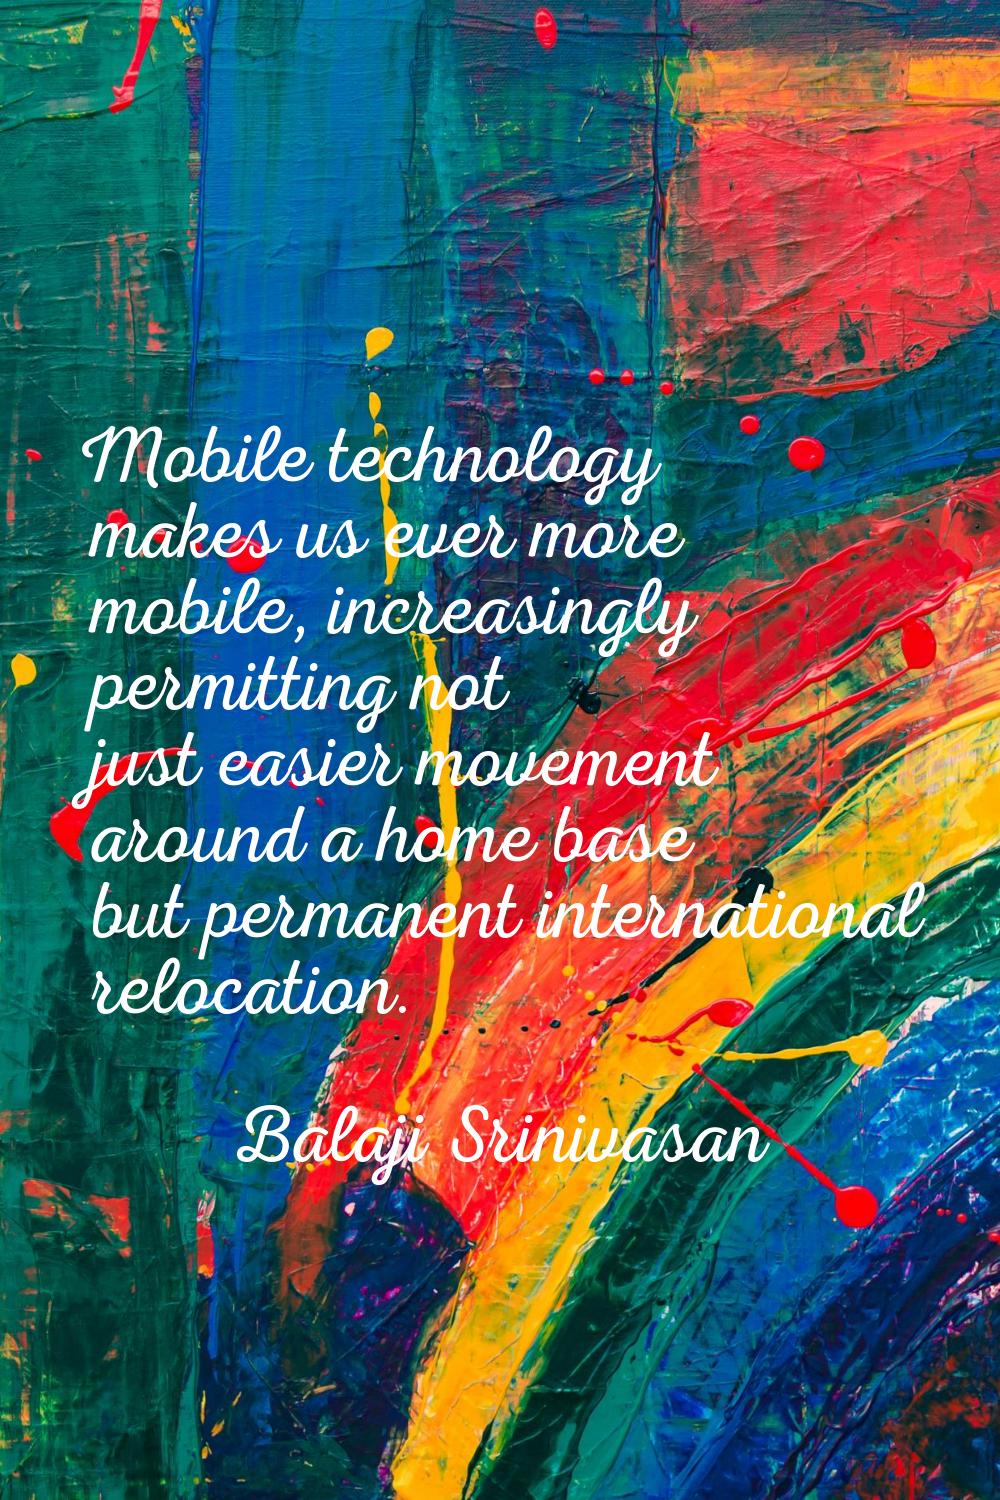 Mobile technology makes us ever more mobile, increasingly permitting not just easier movement aroun